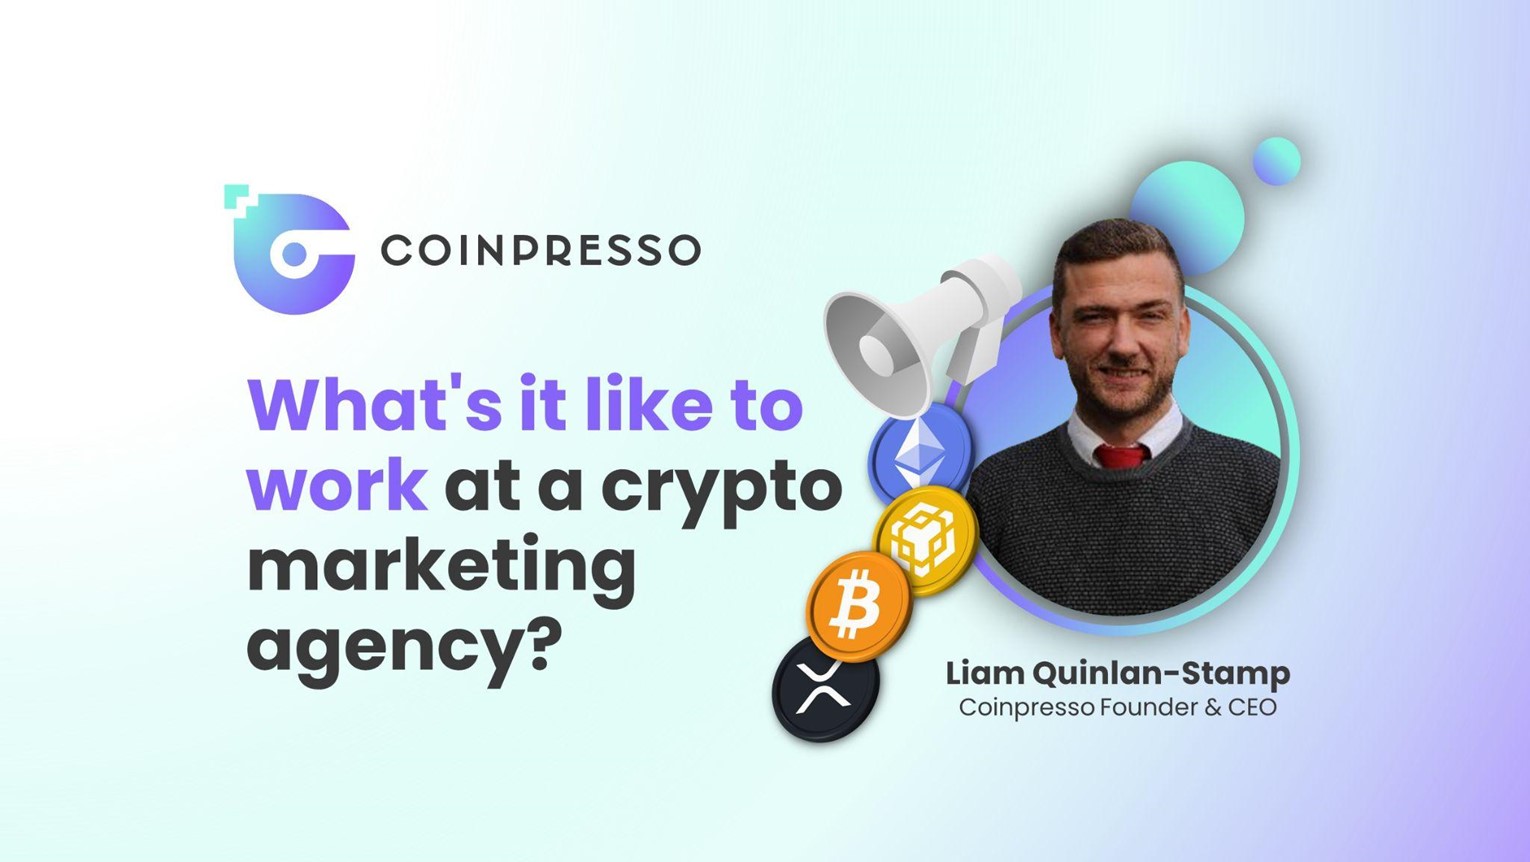 Coinpresso CEO Liam Quinlan-Stamp provides insights on what it takes to be a crypto marketer.